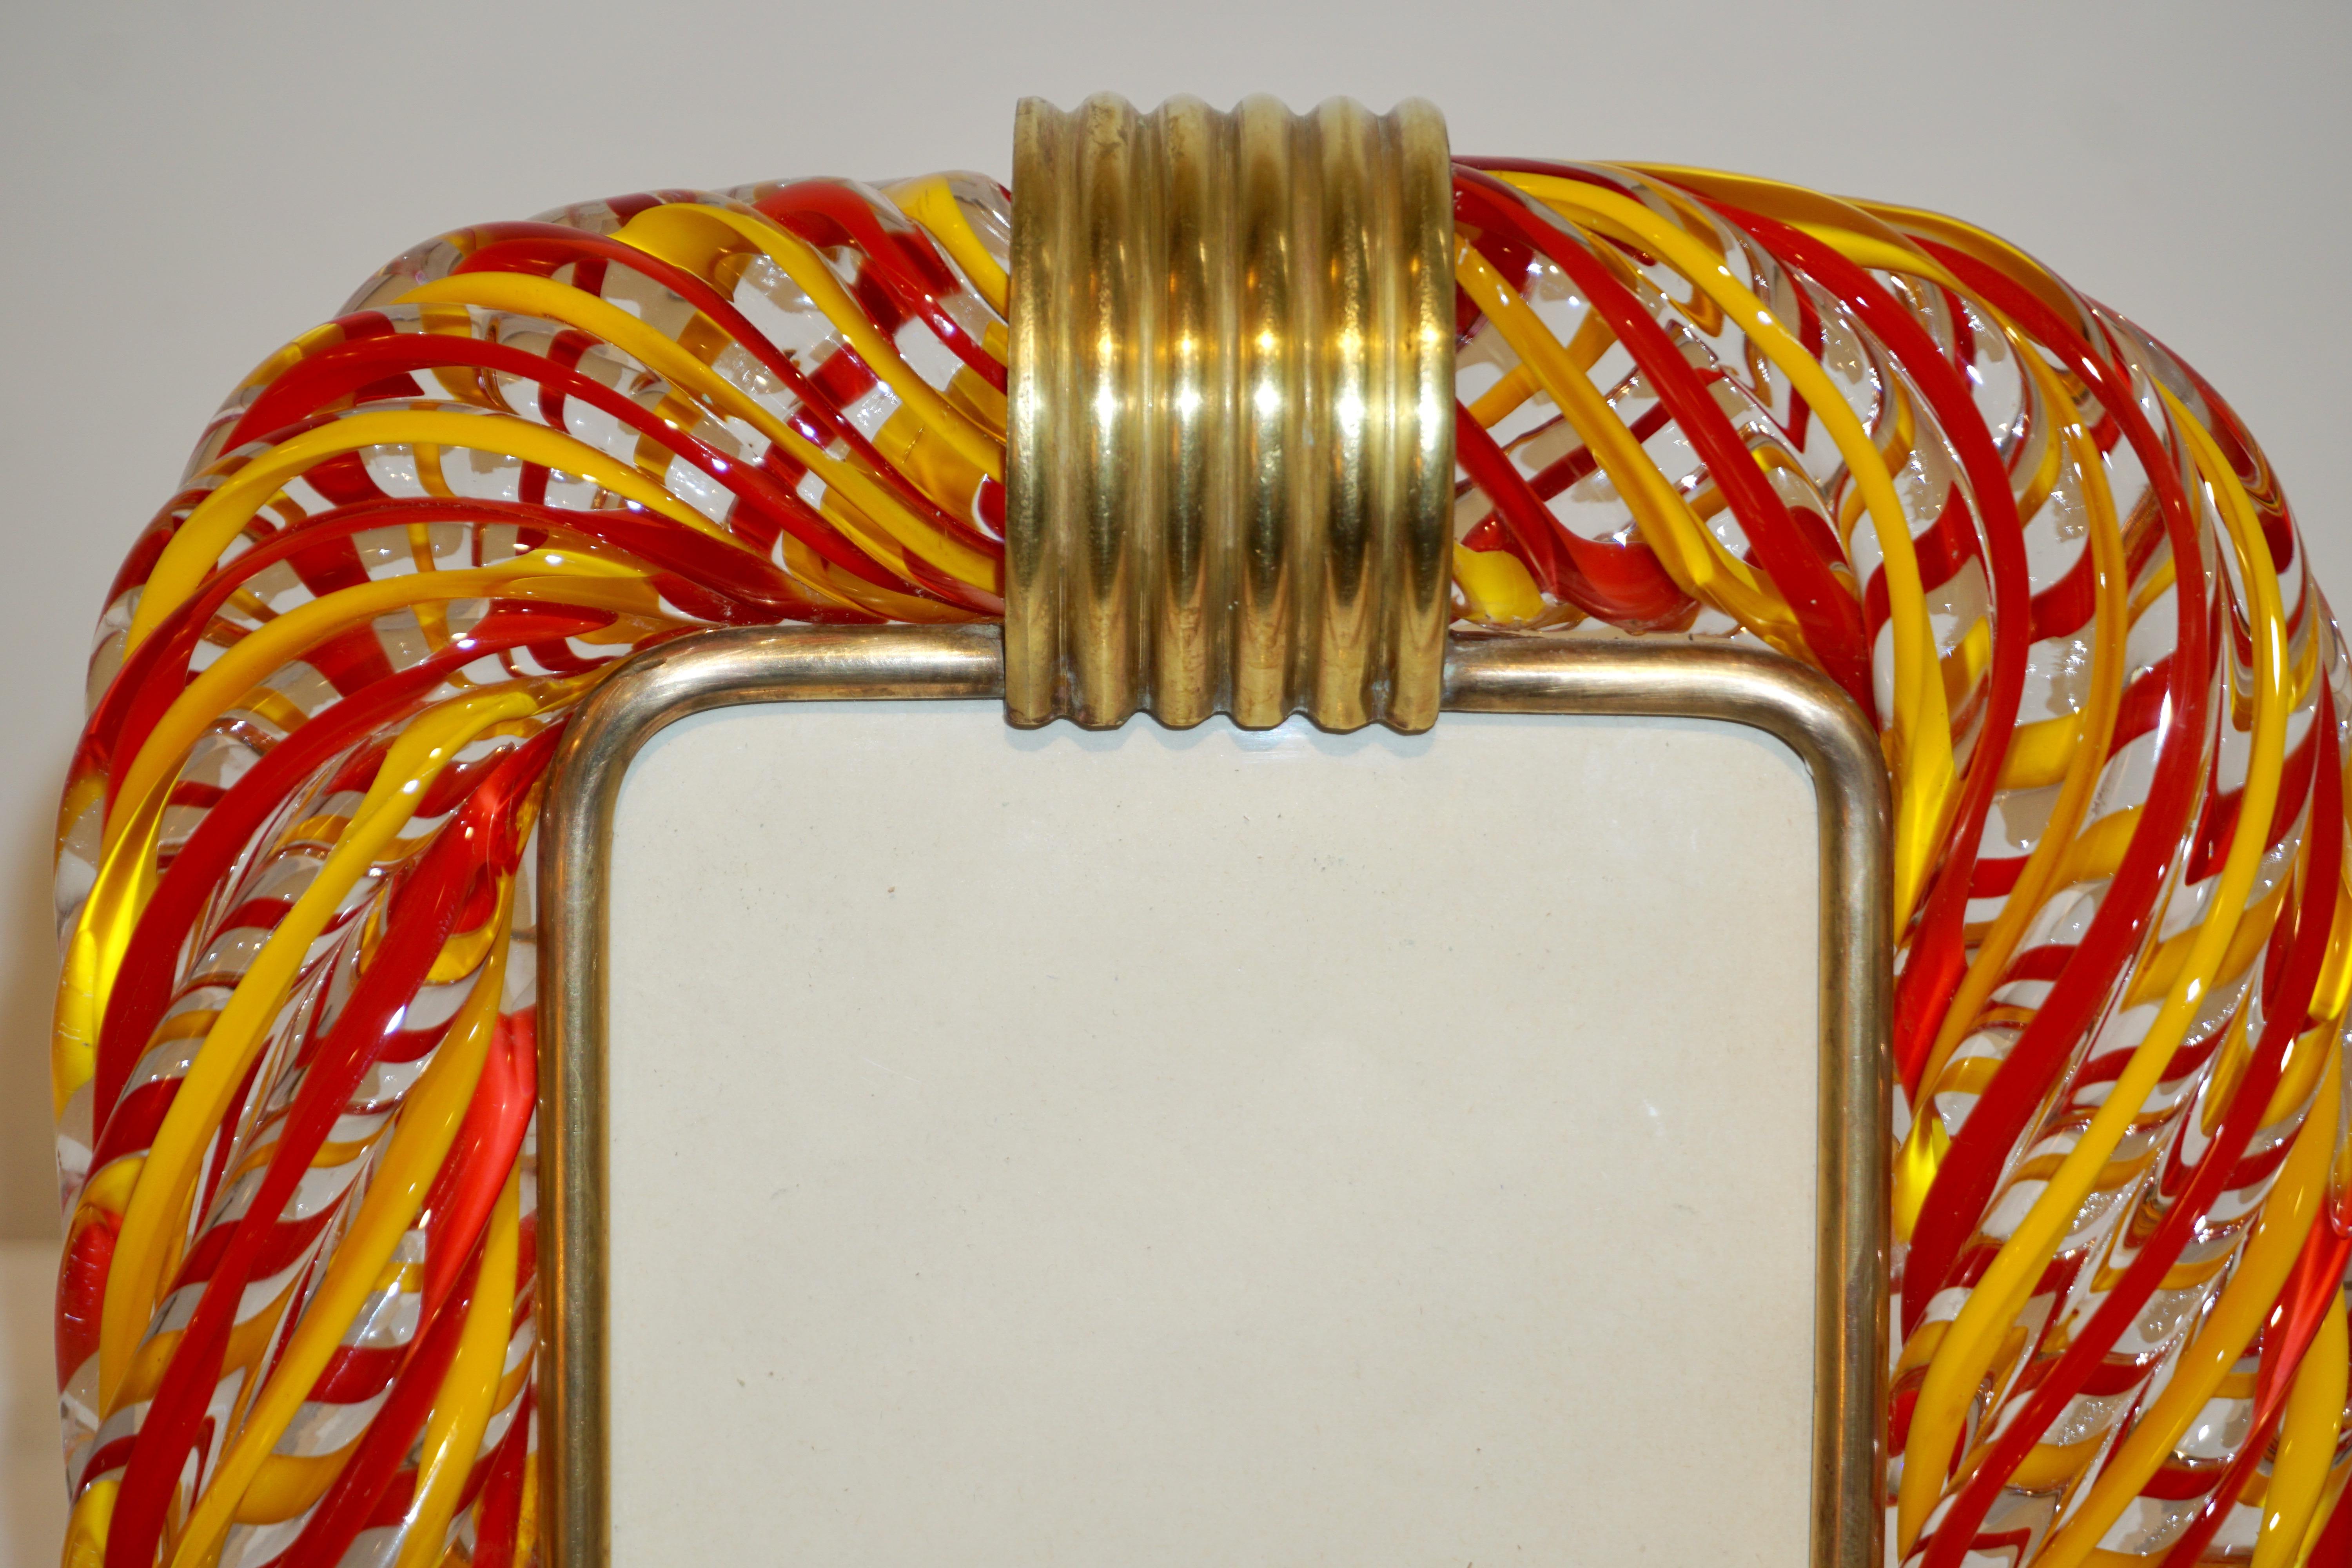 Blown Glass Venini 1970s Vintage Italian Coral Red & Yellow Crystal Murano Glass Photo Frame